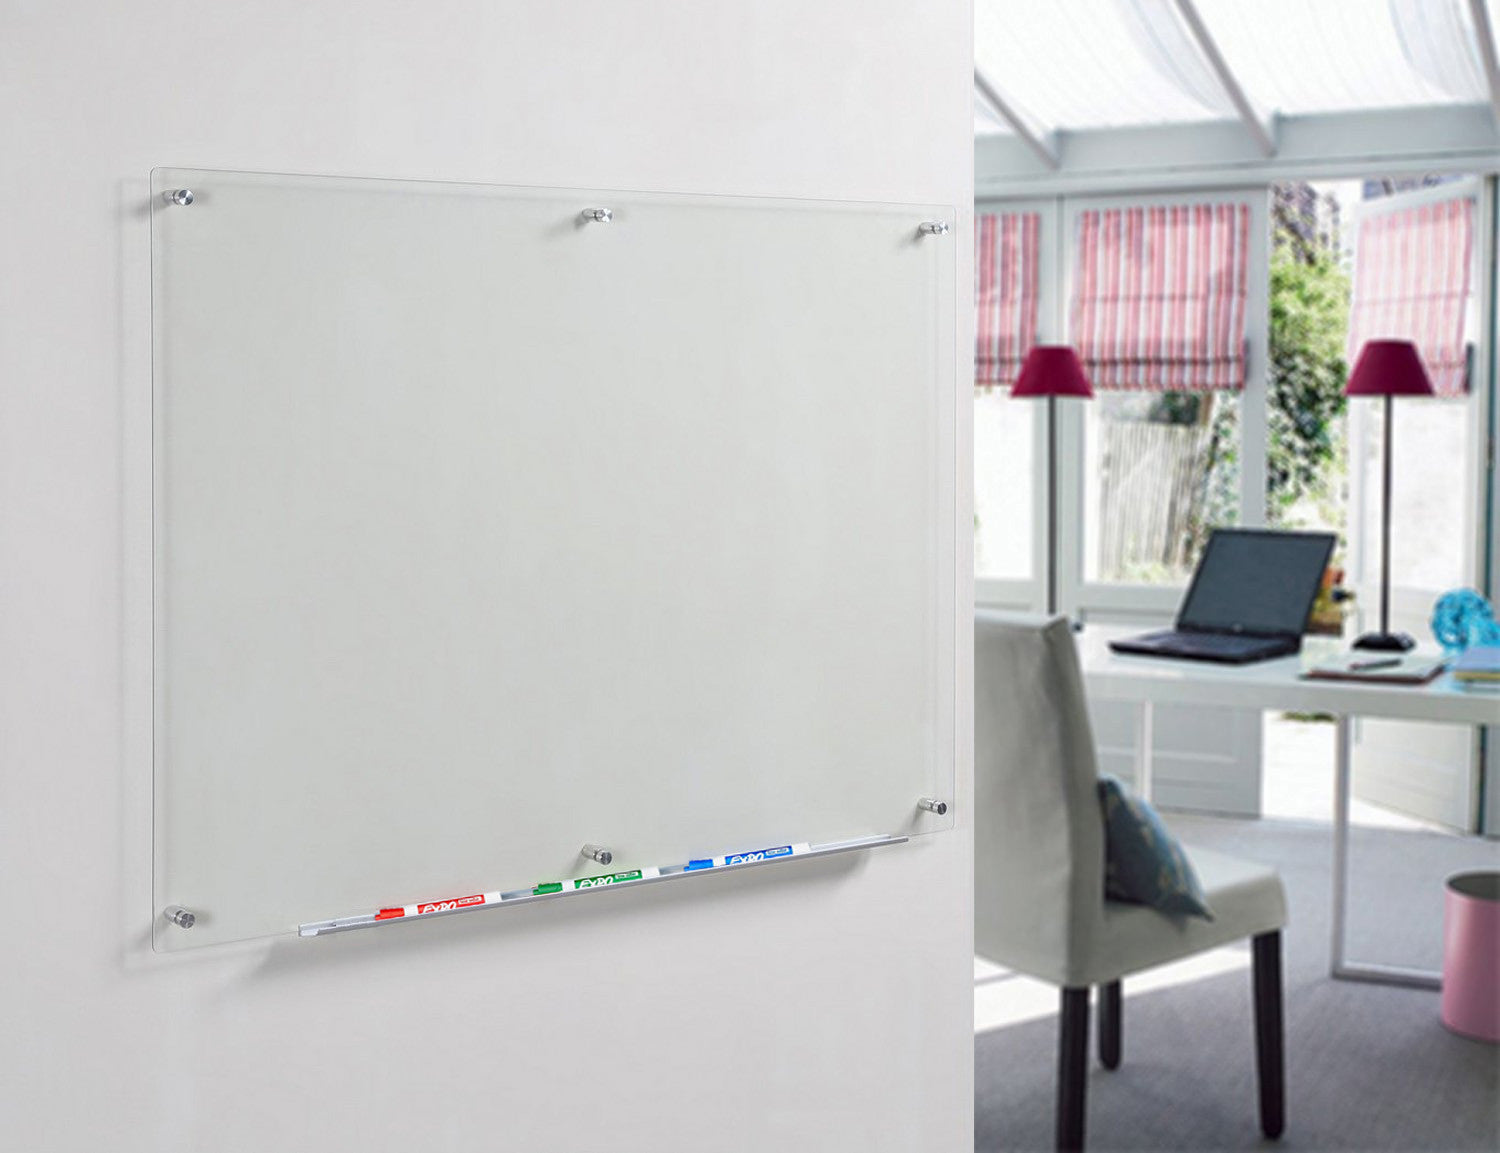 Clear Glass Dry-Erase Board with Aluminum Marker Tray. Can be used for note taking, reminders, brain storming, organization and more!